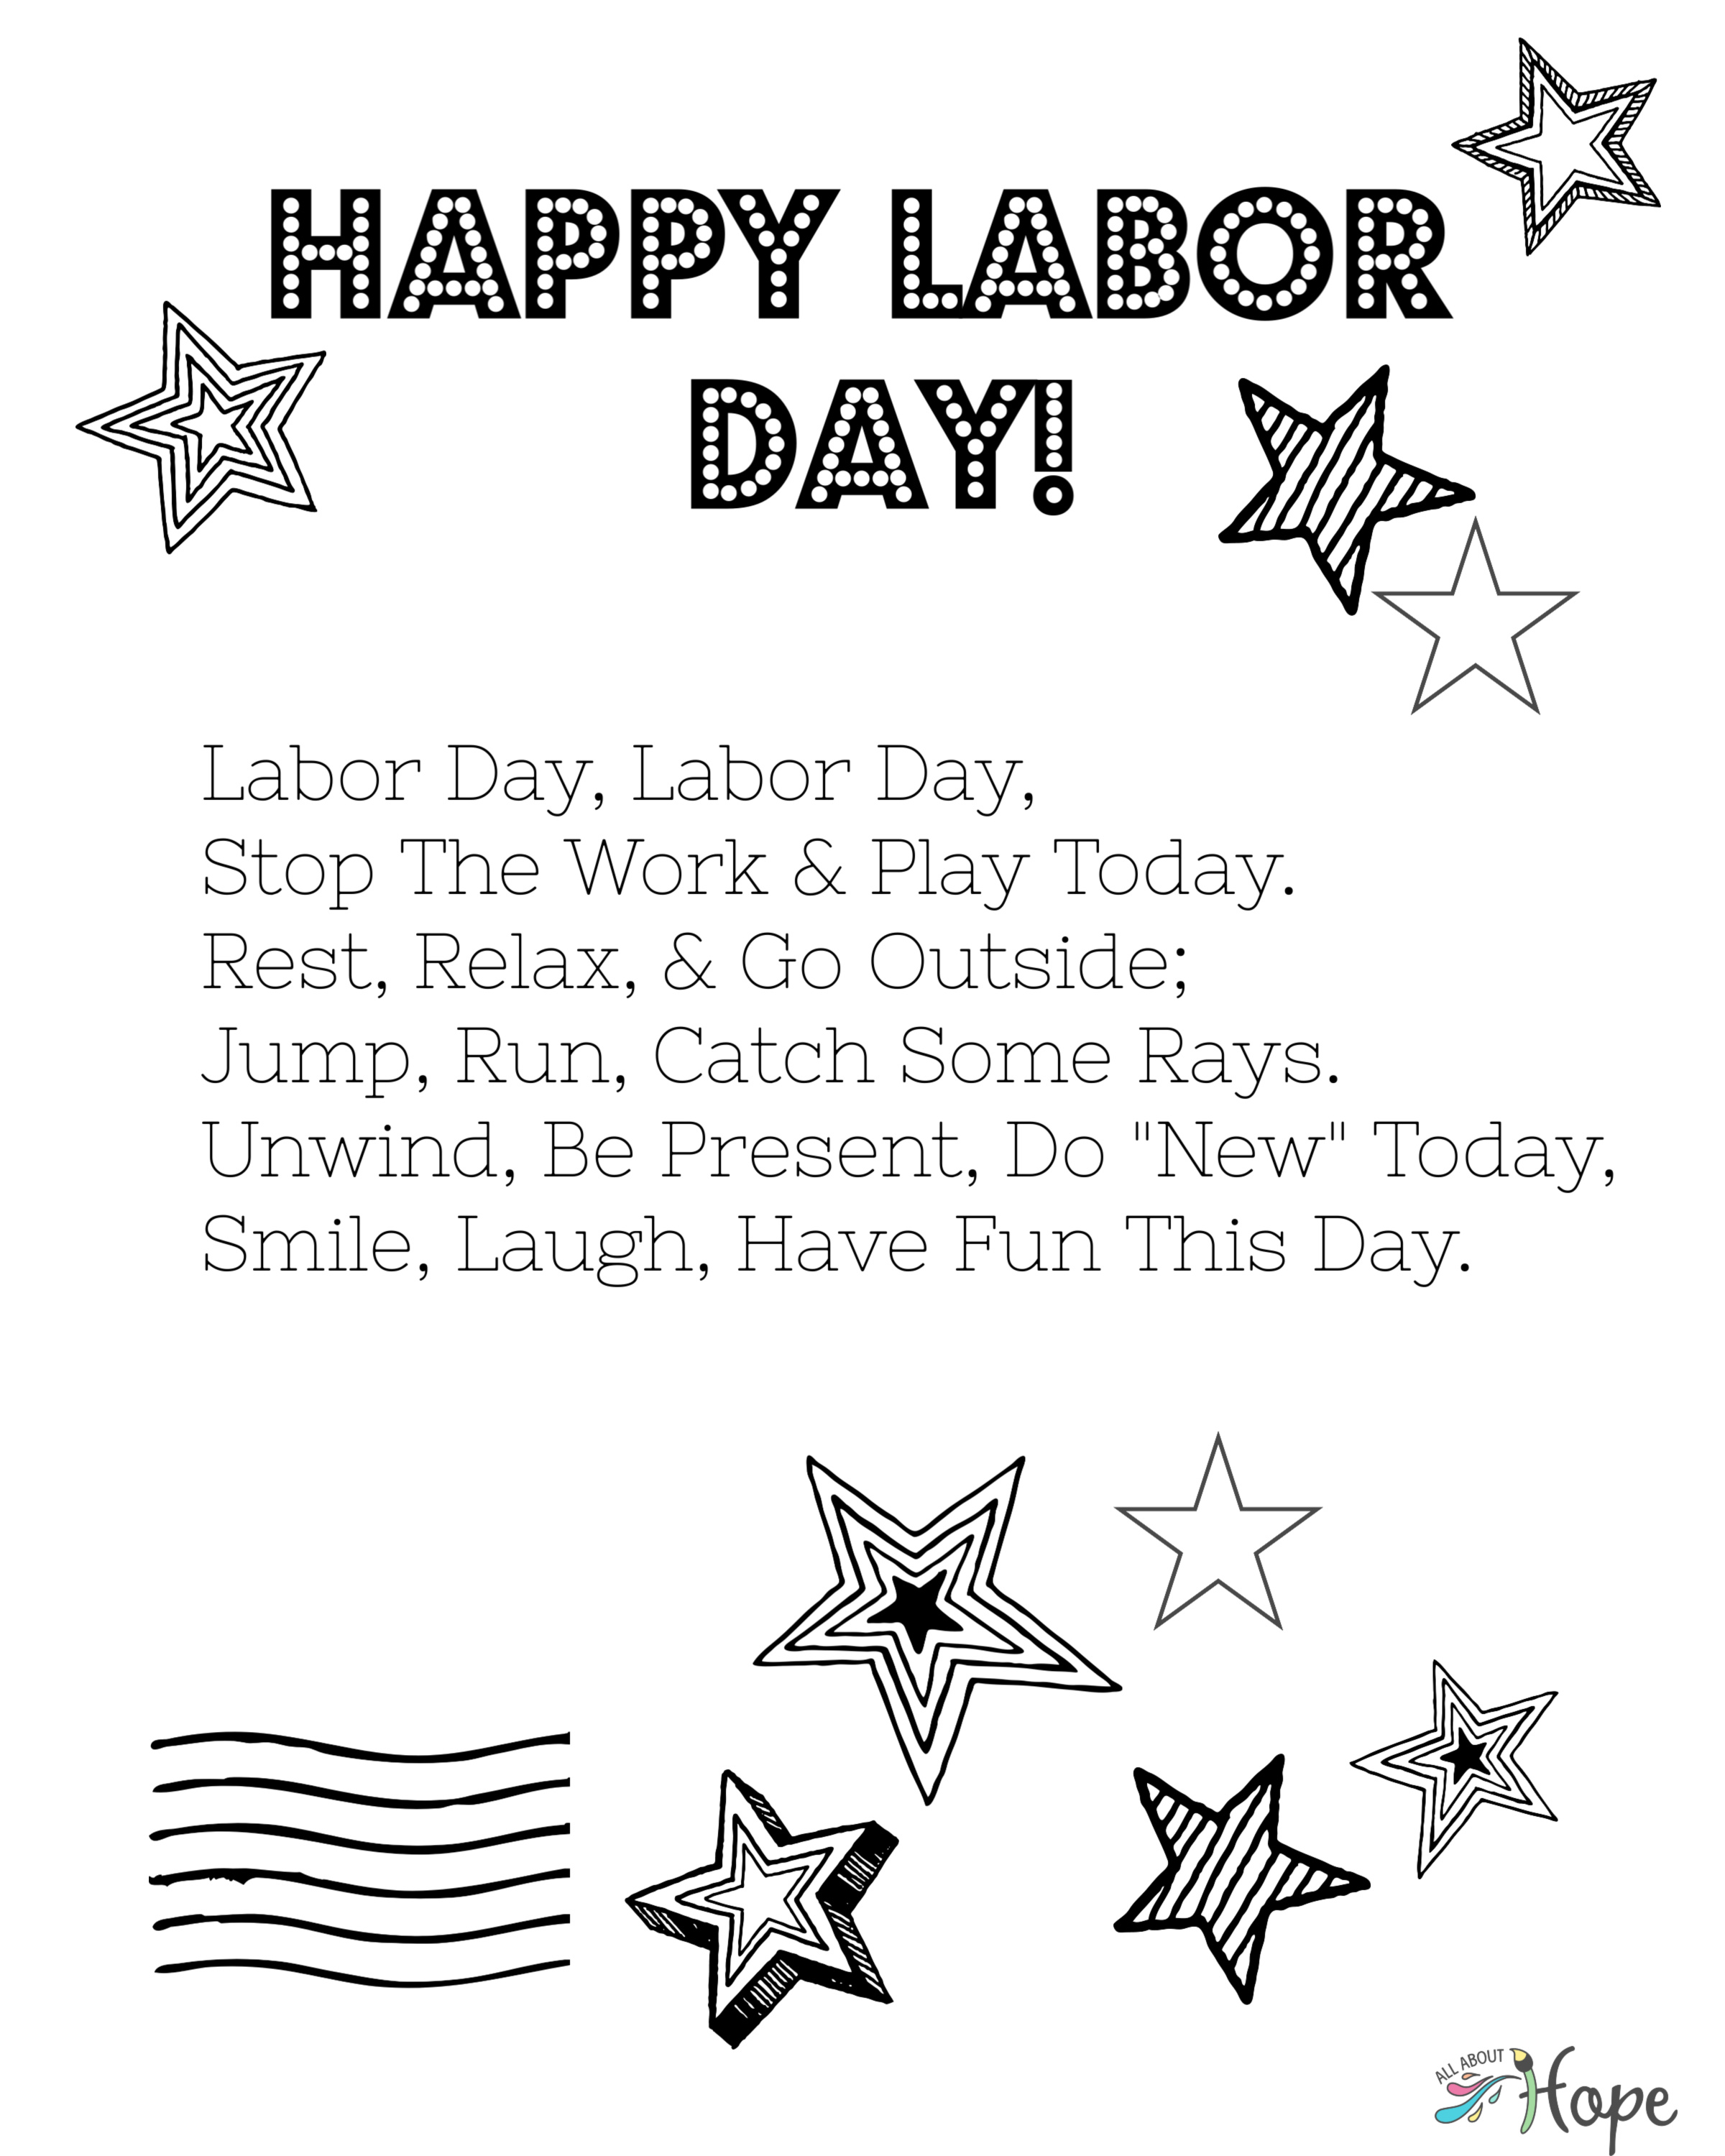 labor-day-poem-coloring-all-about-hope